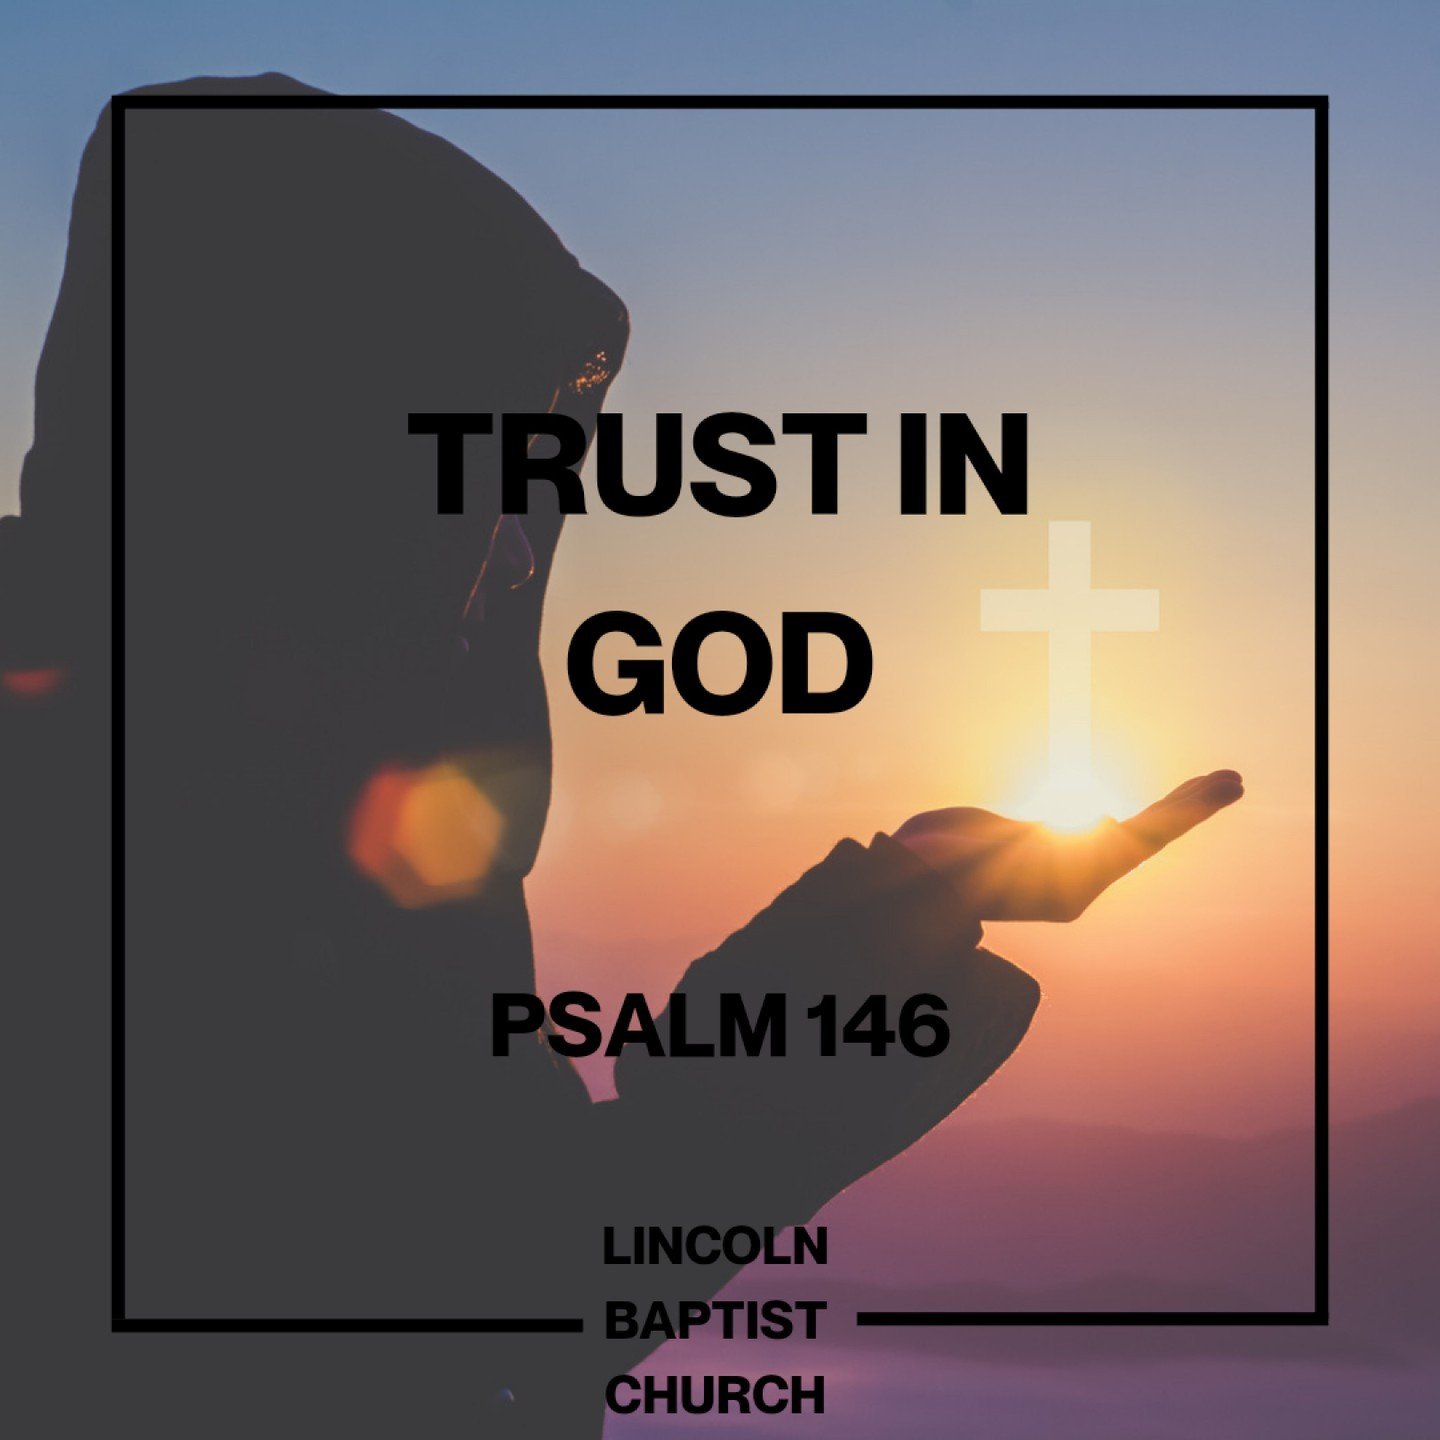 We had an amazing morning of worship, prayer, teaching and fellowship on Sunday.  If you missed this week's sermon on Psalm 146 brought to us by Barnabas, don't worry! You can catch up on it by visiting our website, SoundCloud or Spotify.
#LBC #Linco